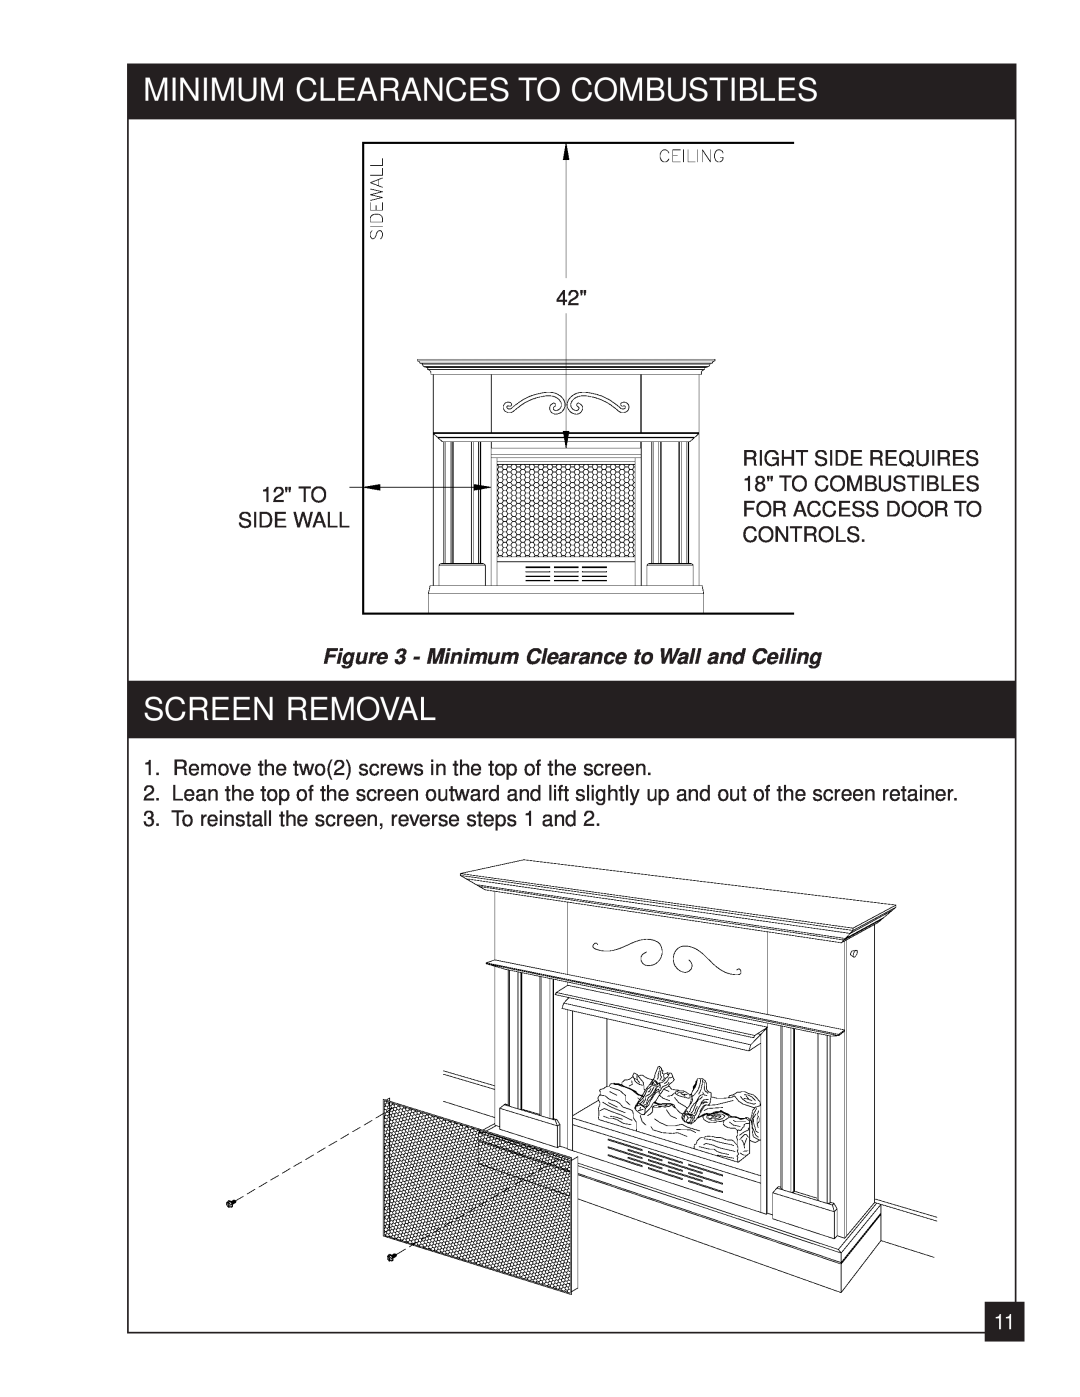 United States Stove 2020L Minimum Clearances To Combustibles, Screen Removal, Minimum Clearance to Wall and Ceiling 